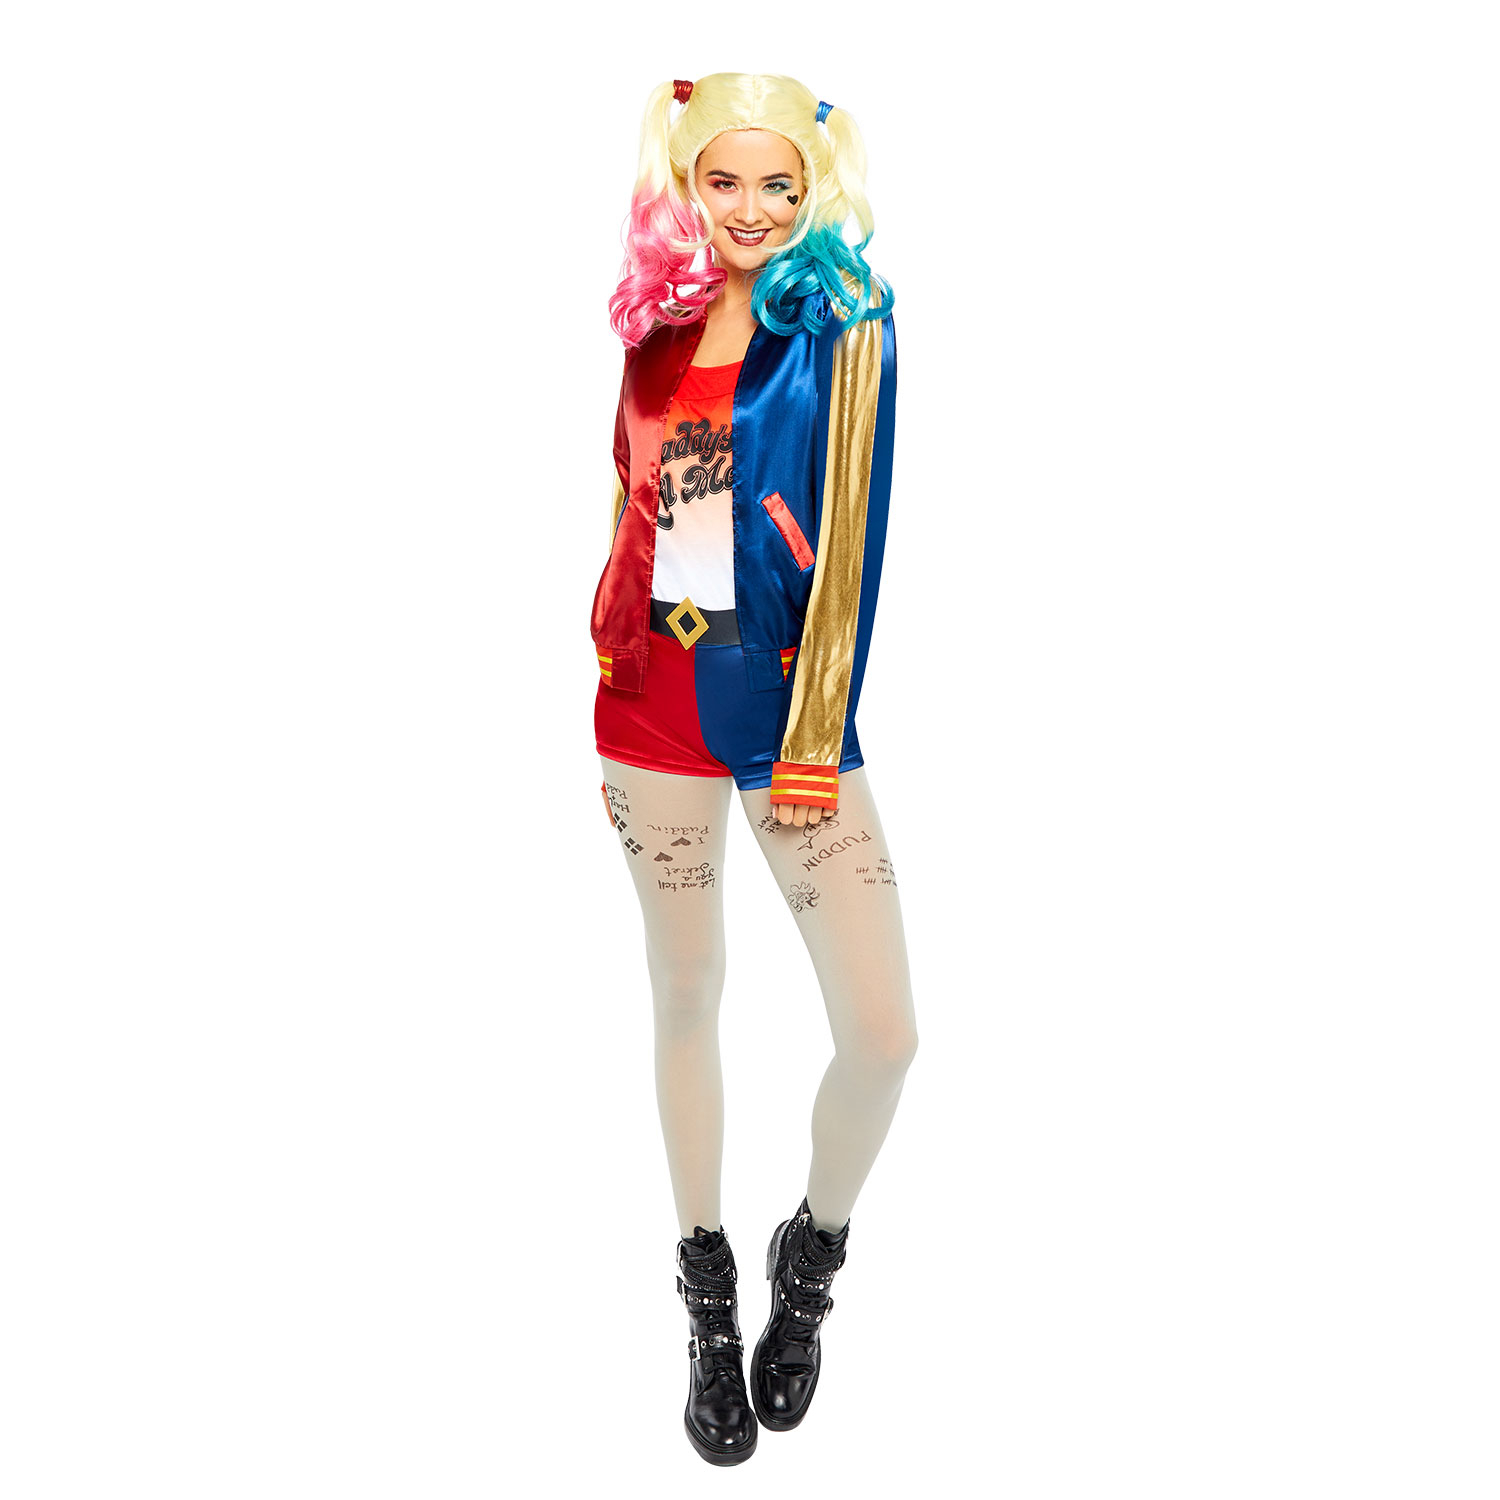 Harley Quinn Suicide Squad Costume - Size 8-10 - 1 PC : Amscan ...